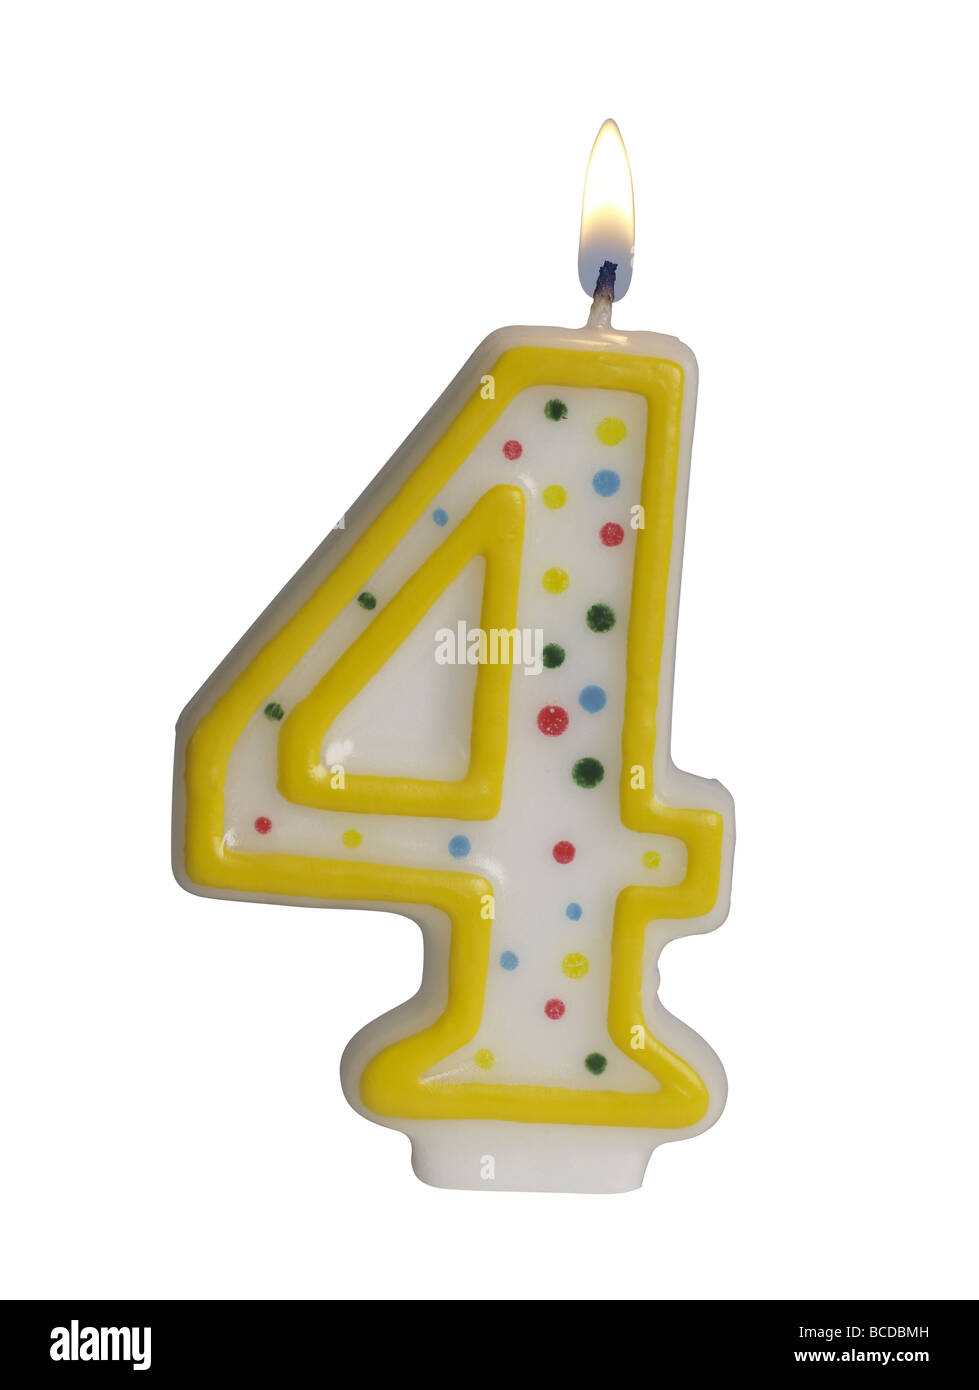 Number 4 birthday candle Stock Photo